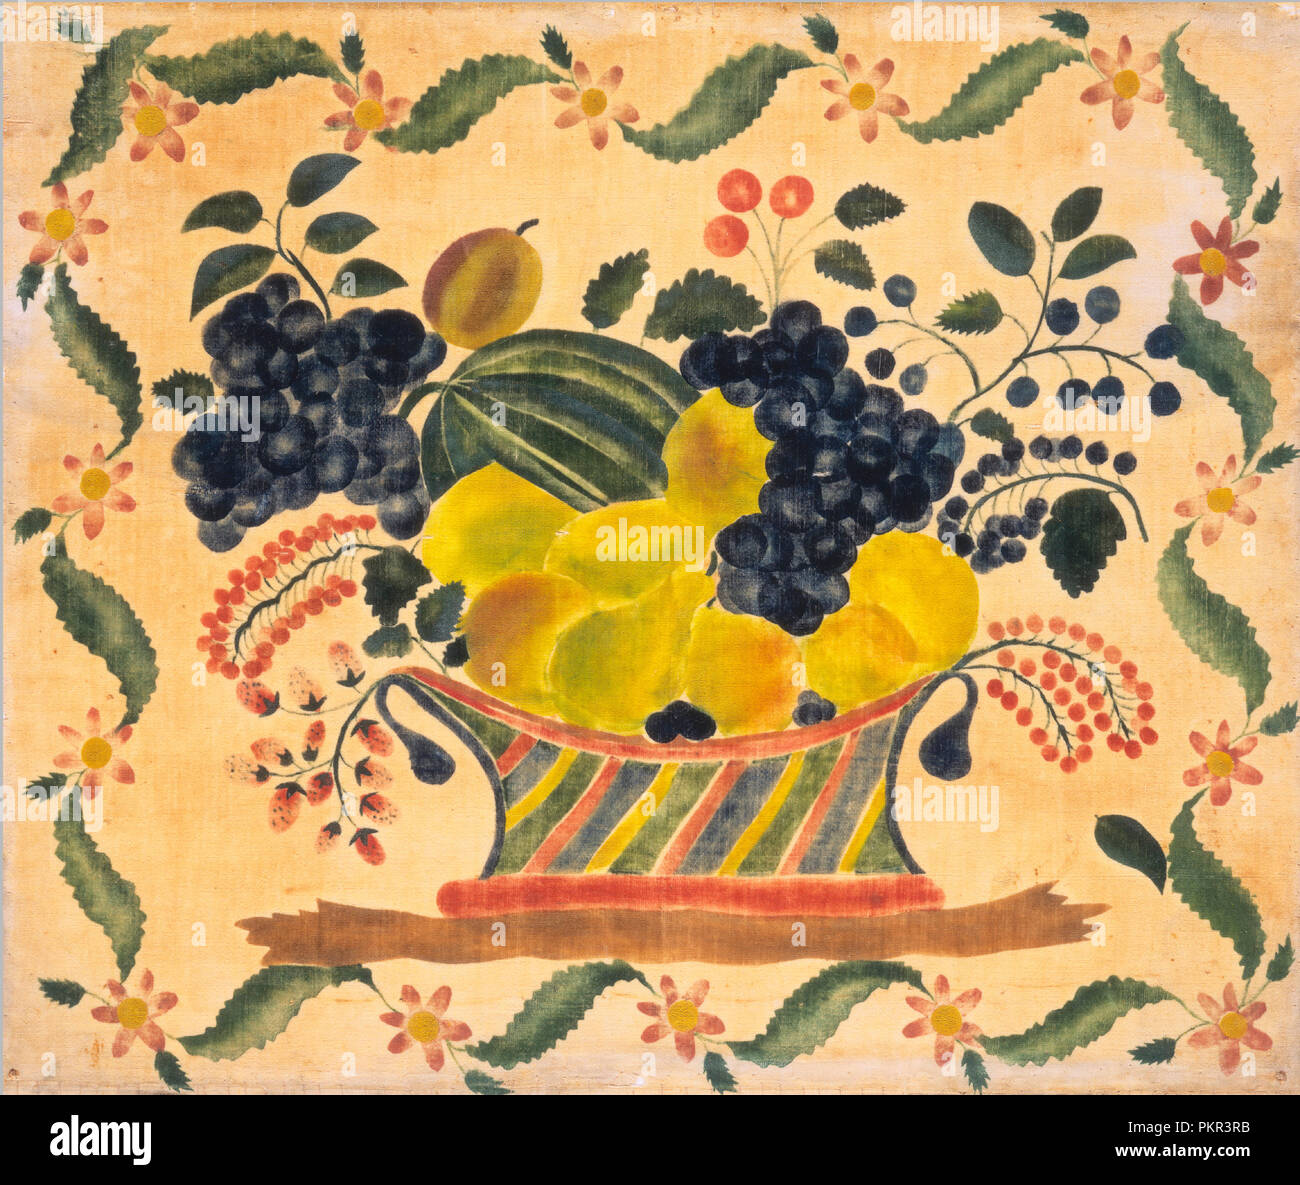 Basket of Fruit. Dated: c. 1830. Dimensions: overall: 40.6 x 48.4 cm (16 x 19 1/16 in.)  framed: 49.5 x 57.6 x 2.8 cm (19 1/2 x 22 11/16 x 1 1/8 in.). Medium: watercolor on velveteen (theorem painting). Museum: National Gallery of Art, Washington DC. Author: American 19th Century. Stock Photo